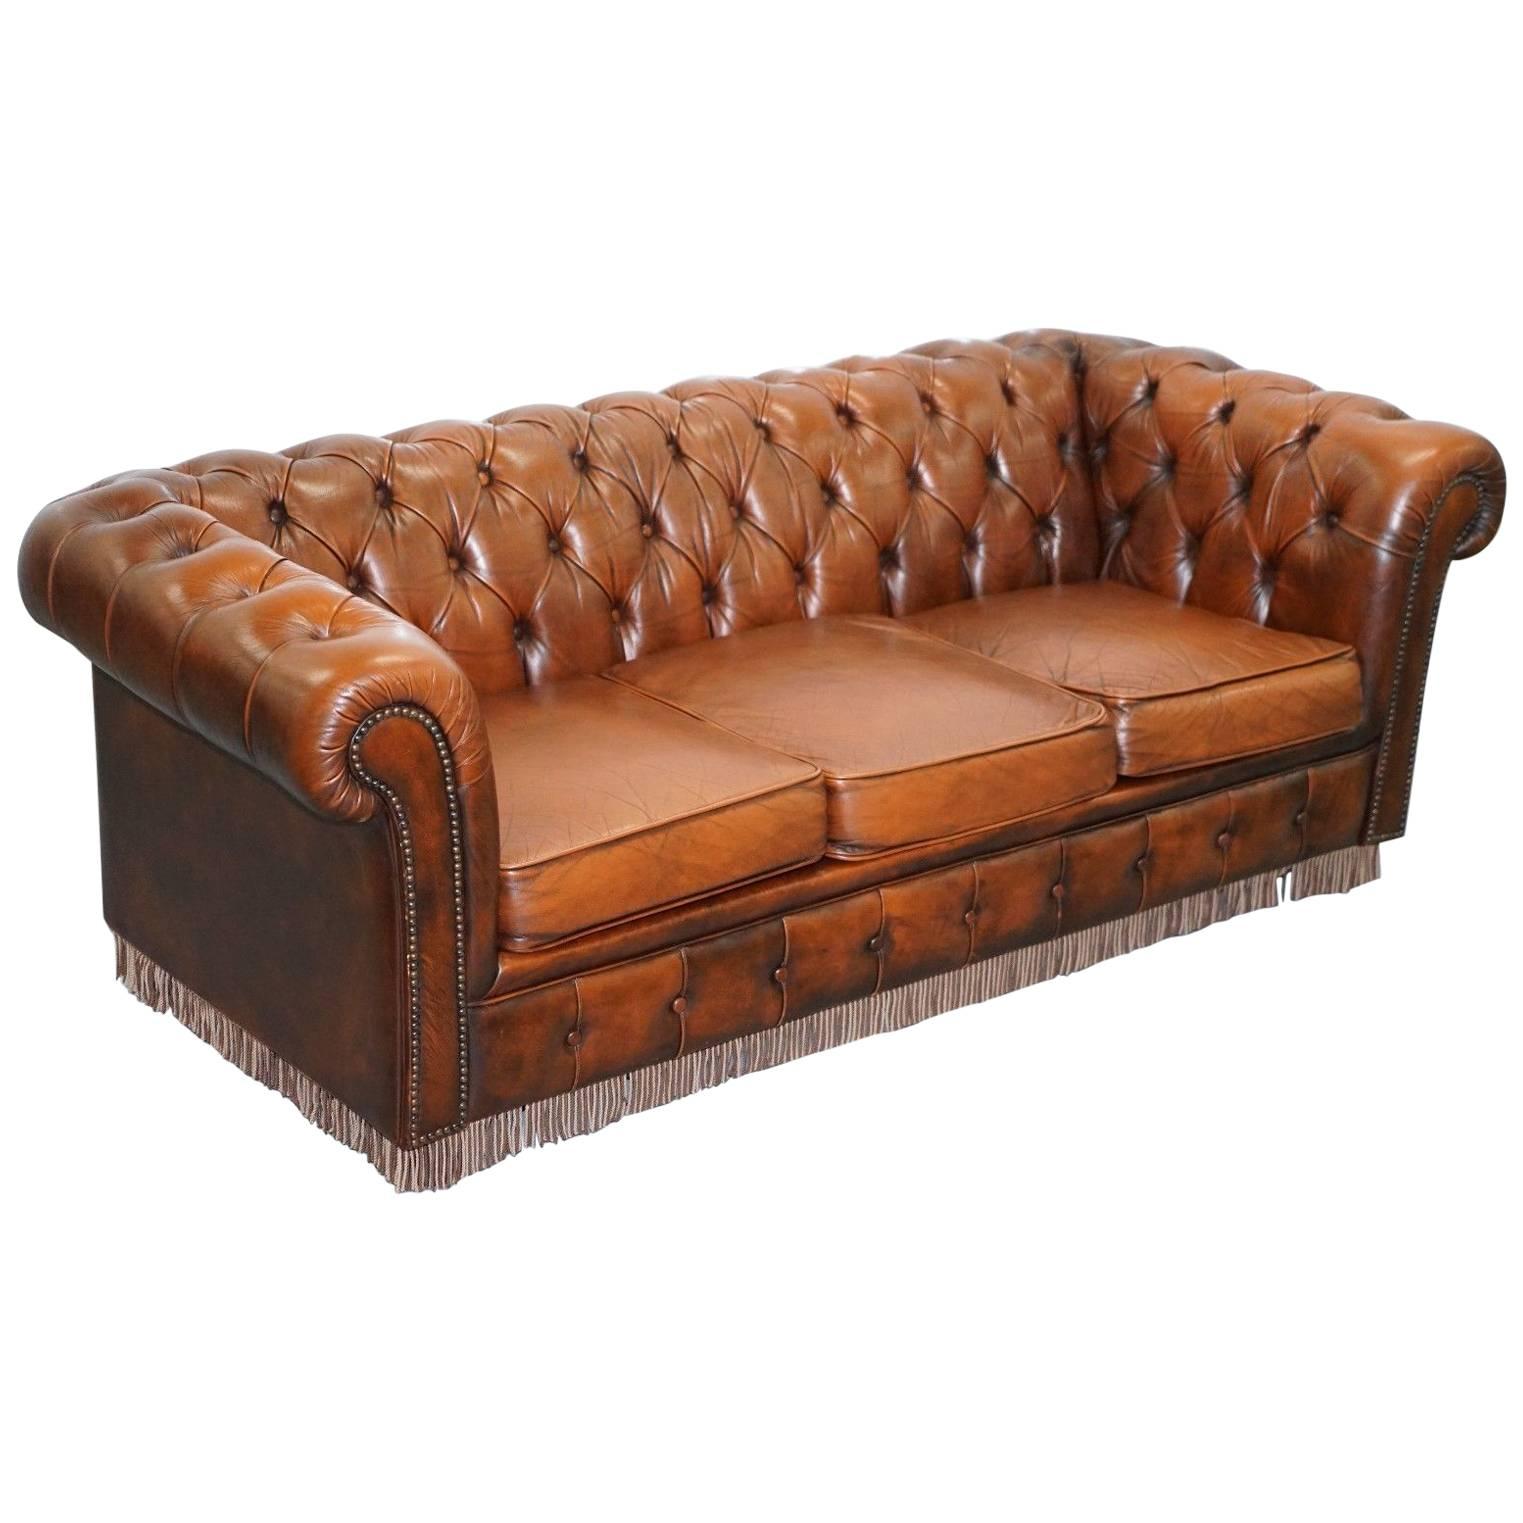 Original Vintage Hand-Dyed Aged Brown Leather Chesterfield Sofabed Rare Find